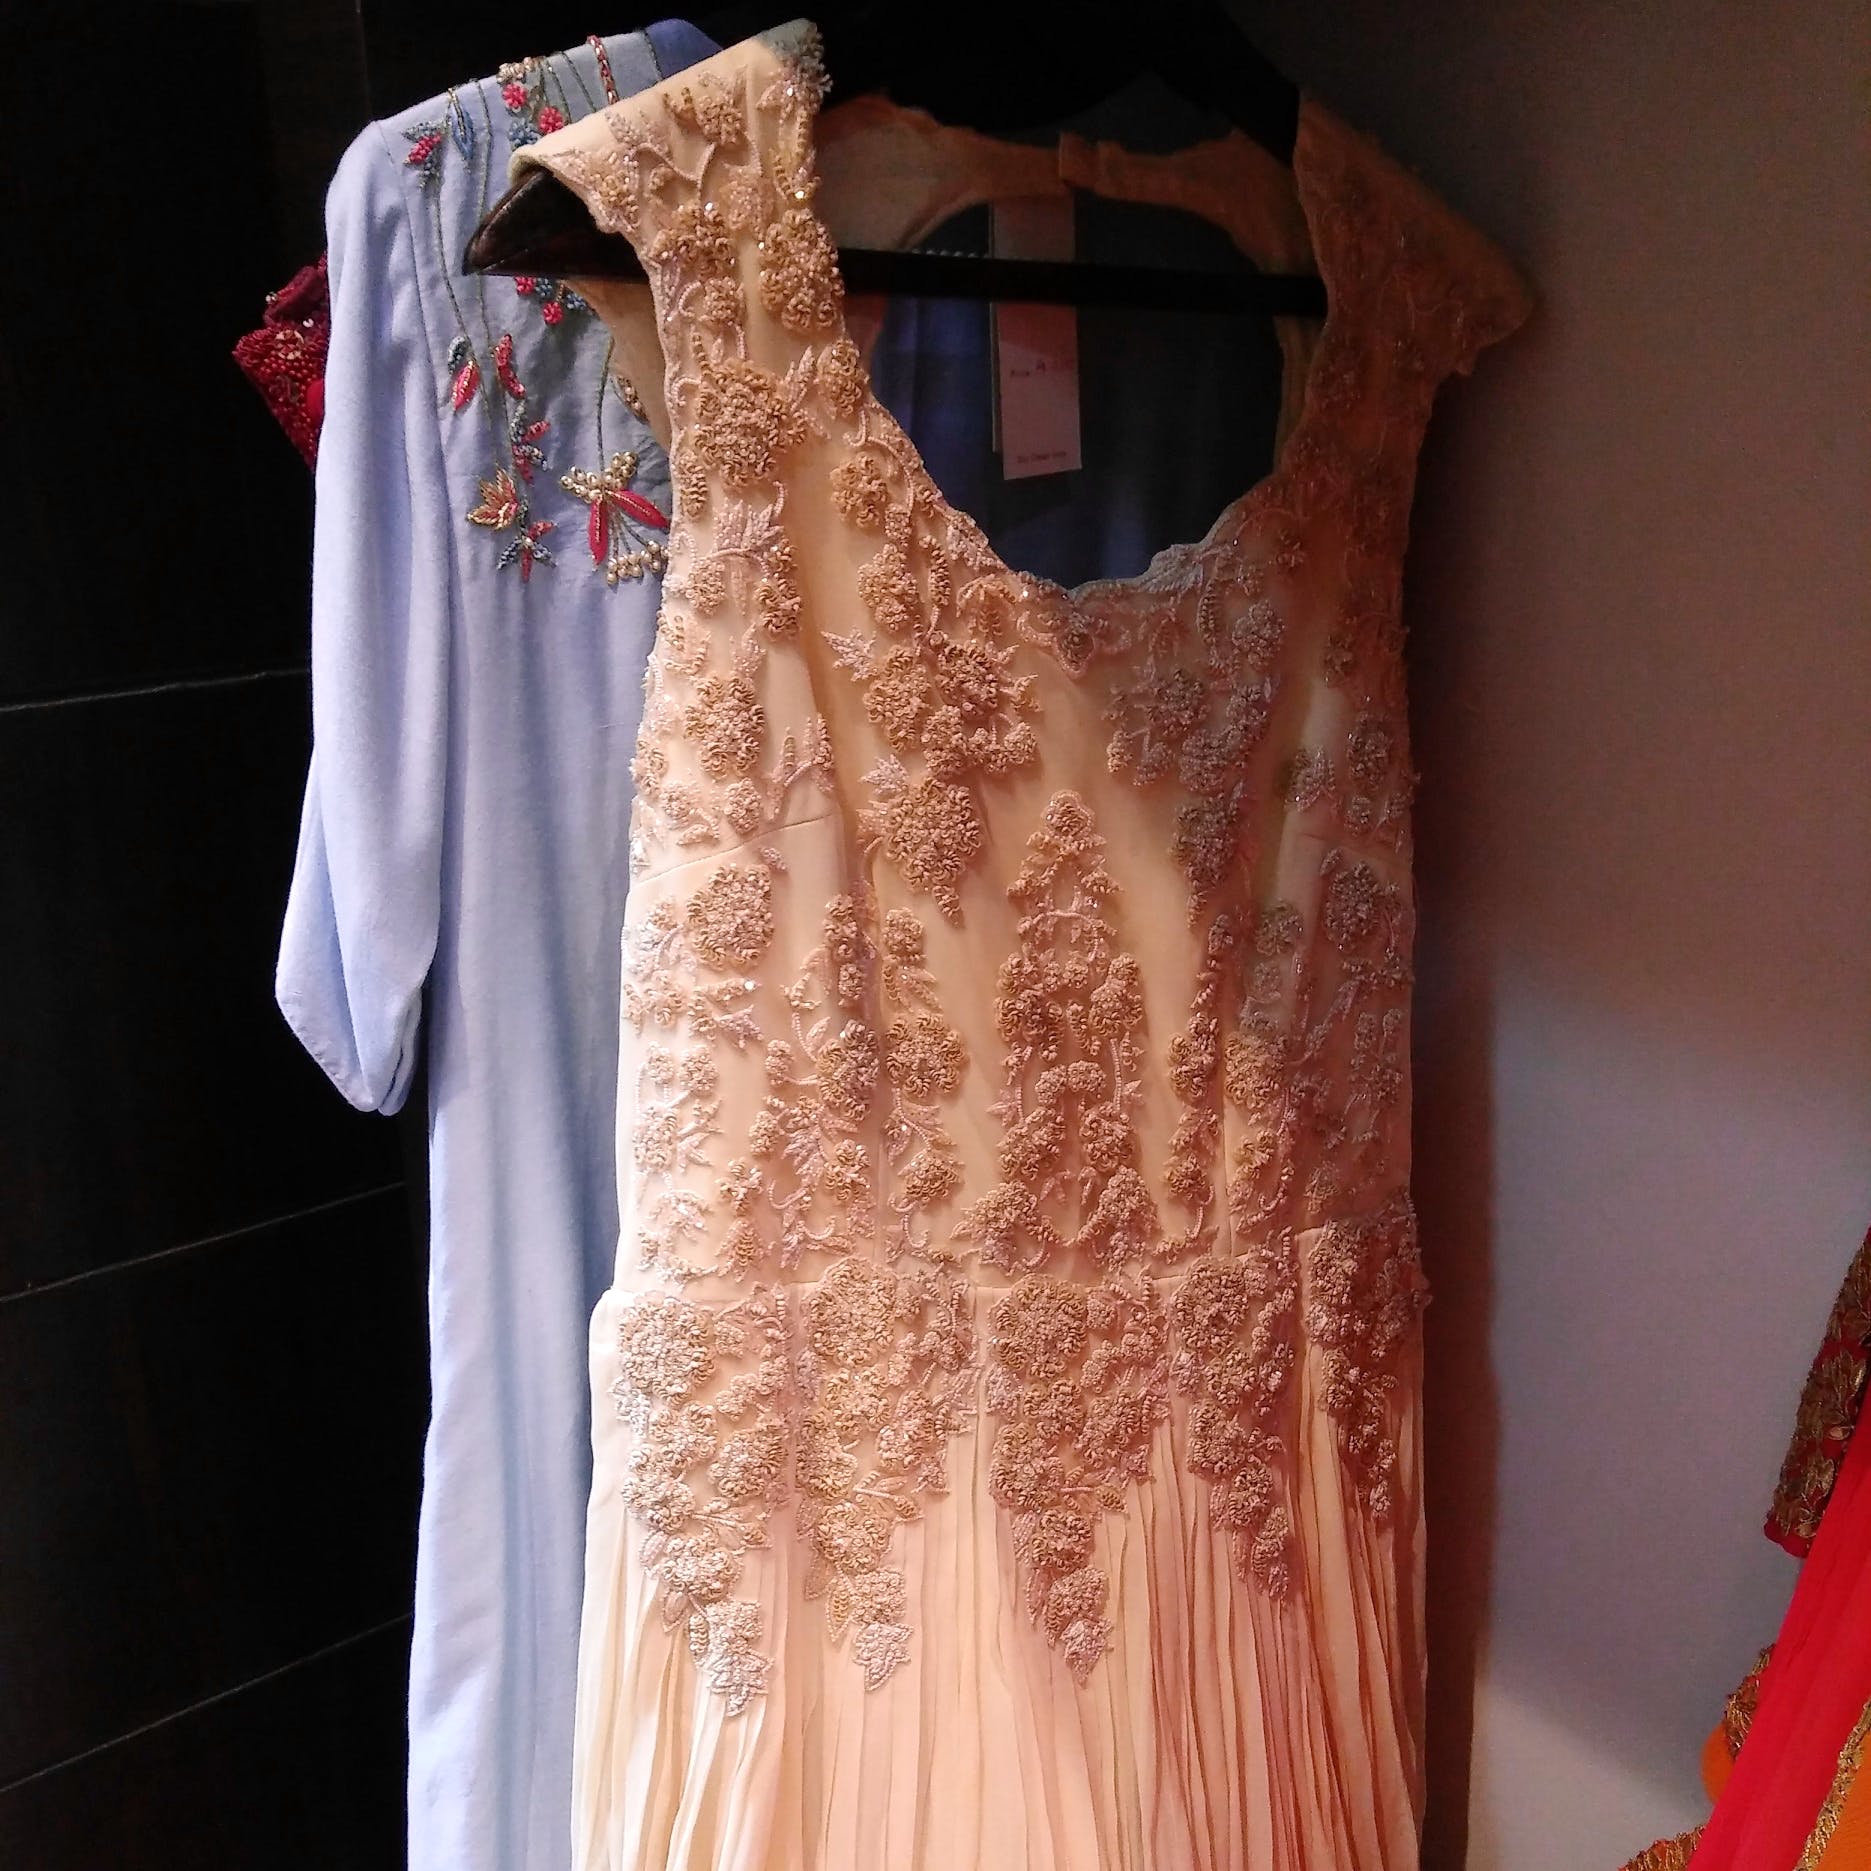 Clothing,Dress,Day dress,Textile,Outerwear,Beige,Peach,Formal wear,Embroidery,Fashion design